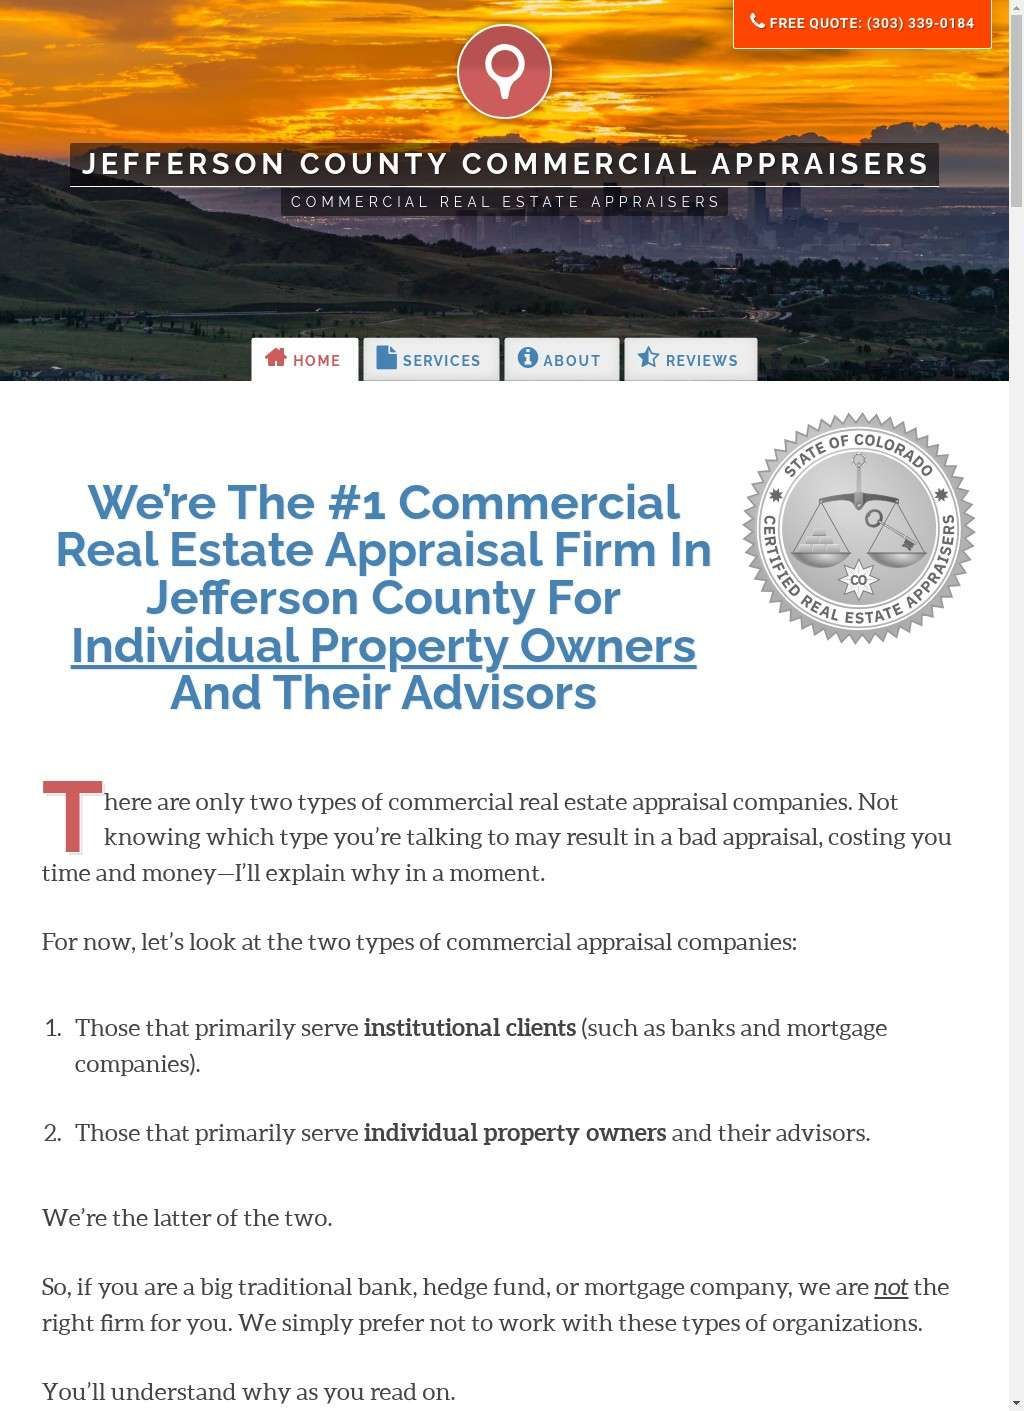 Appraisers of Jefferson County Commercial Property